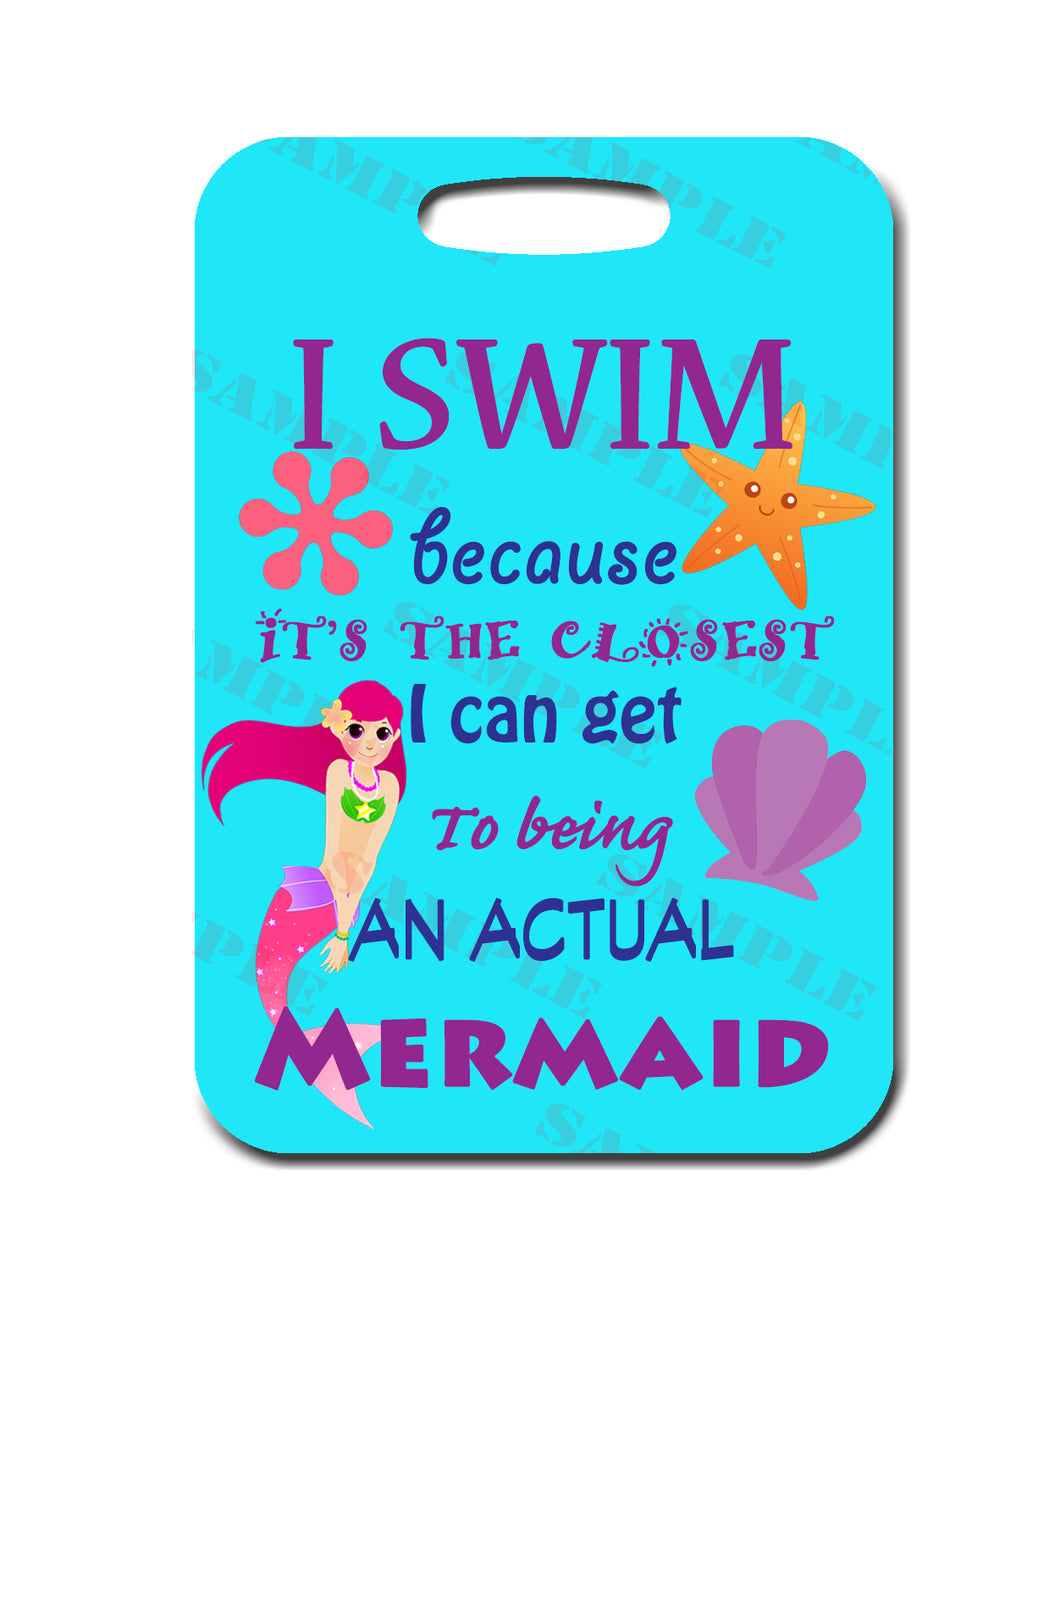 I Swim Because Its the Closest I Can Get to Being an Actual Mermaid